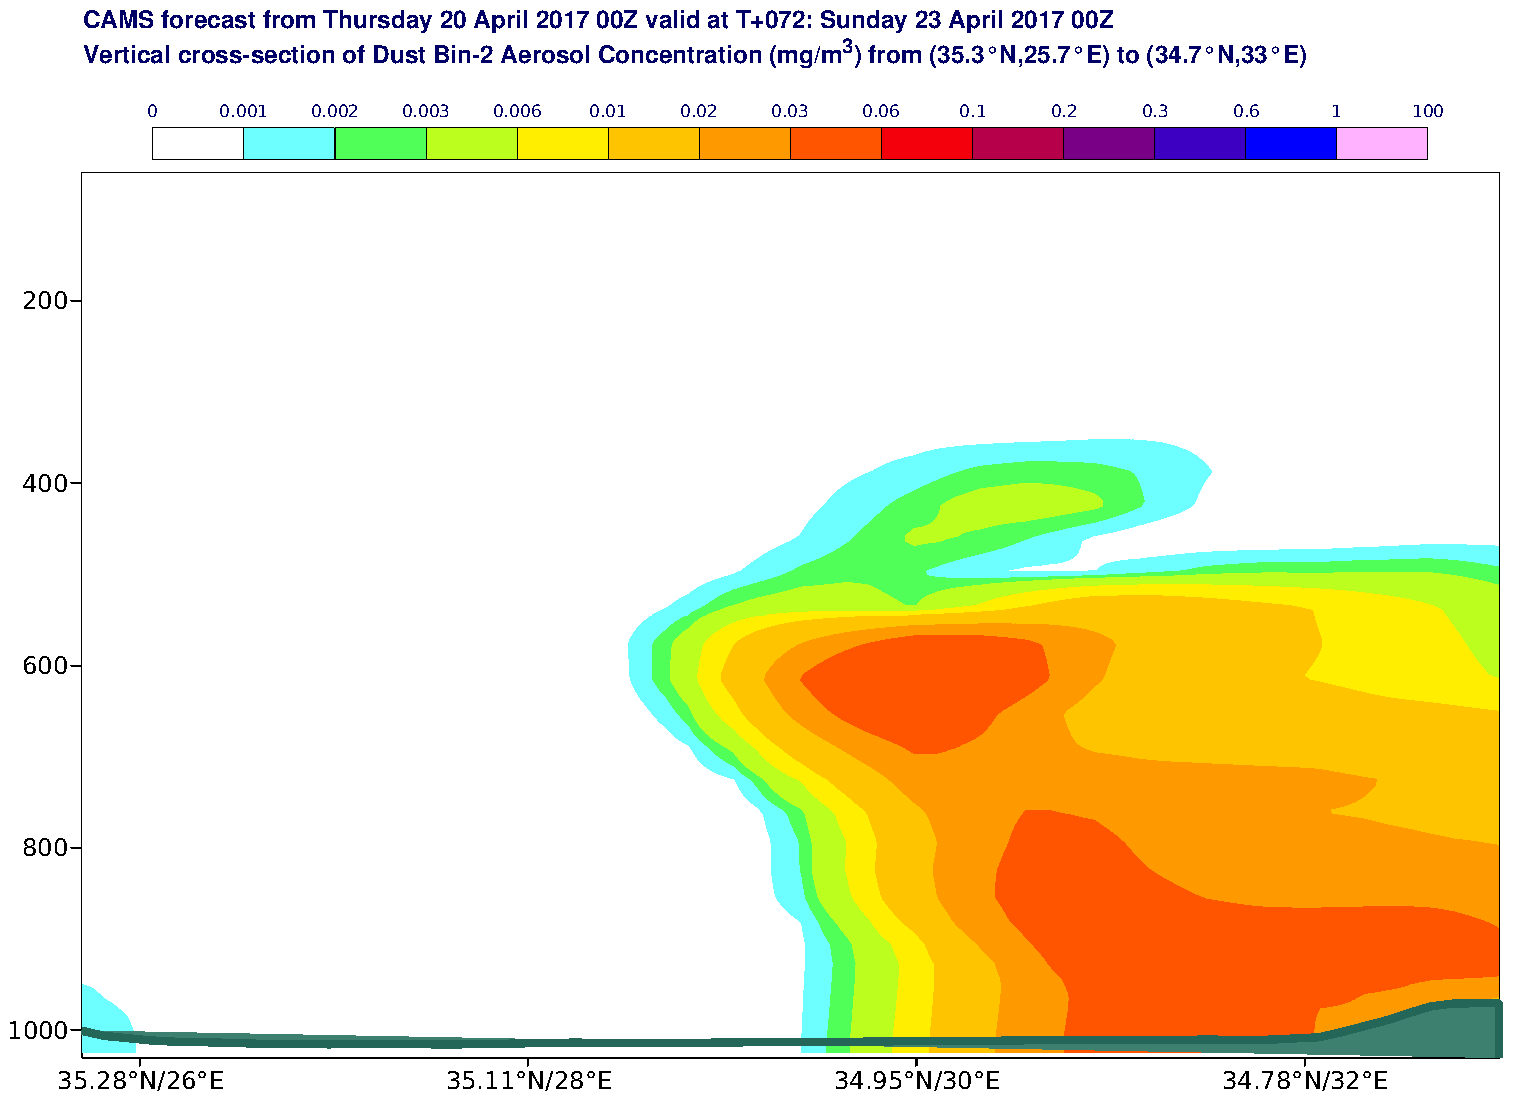 Vertical cross-section of Dust Bin-2 Aerosol Concentration (mg/m3) valid at T72 - 2017-04-23 00:00